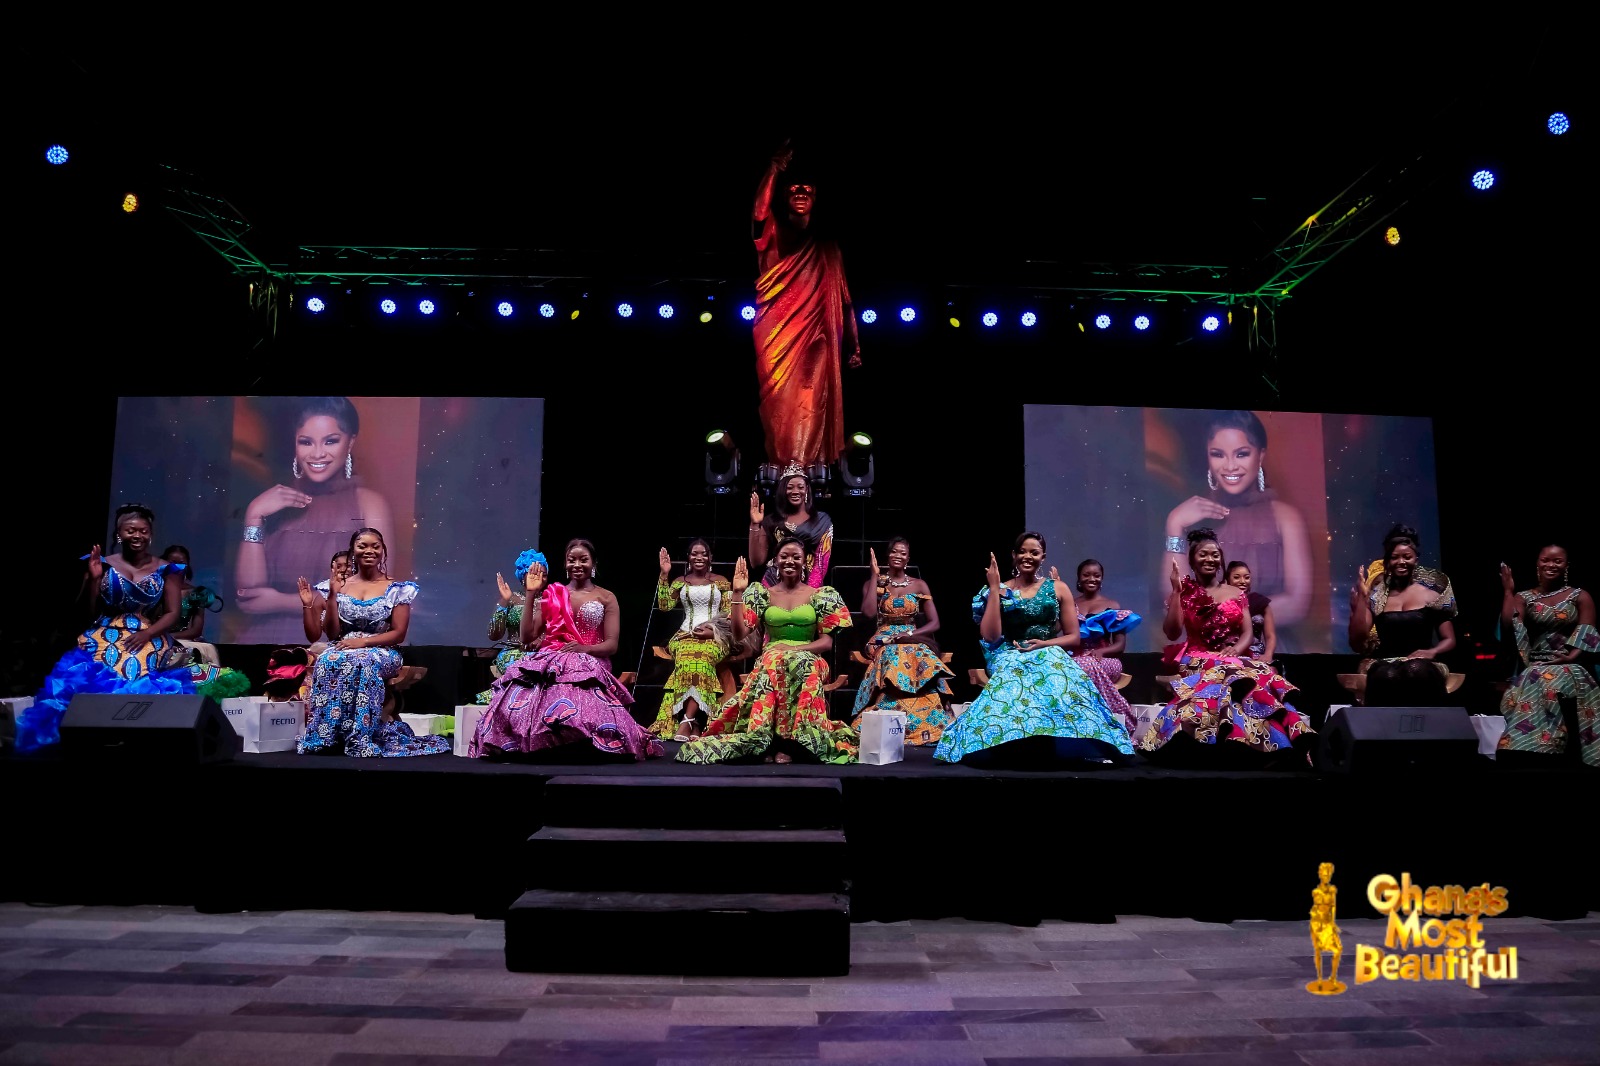 Celebrating Ghana's Rich Culture: Official Music Video for Ghana's Most Beautiful 2023 Released